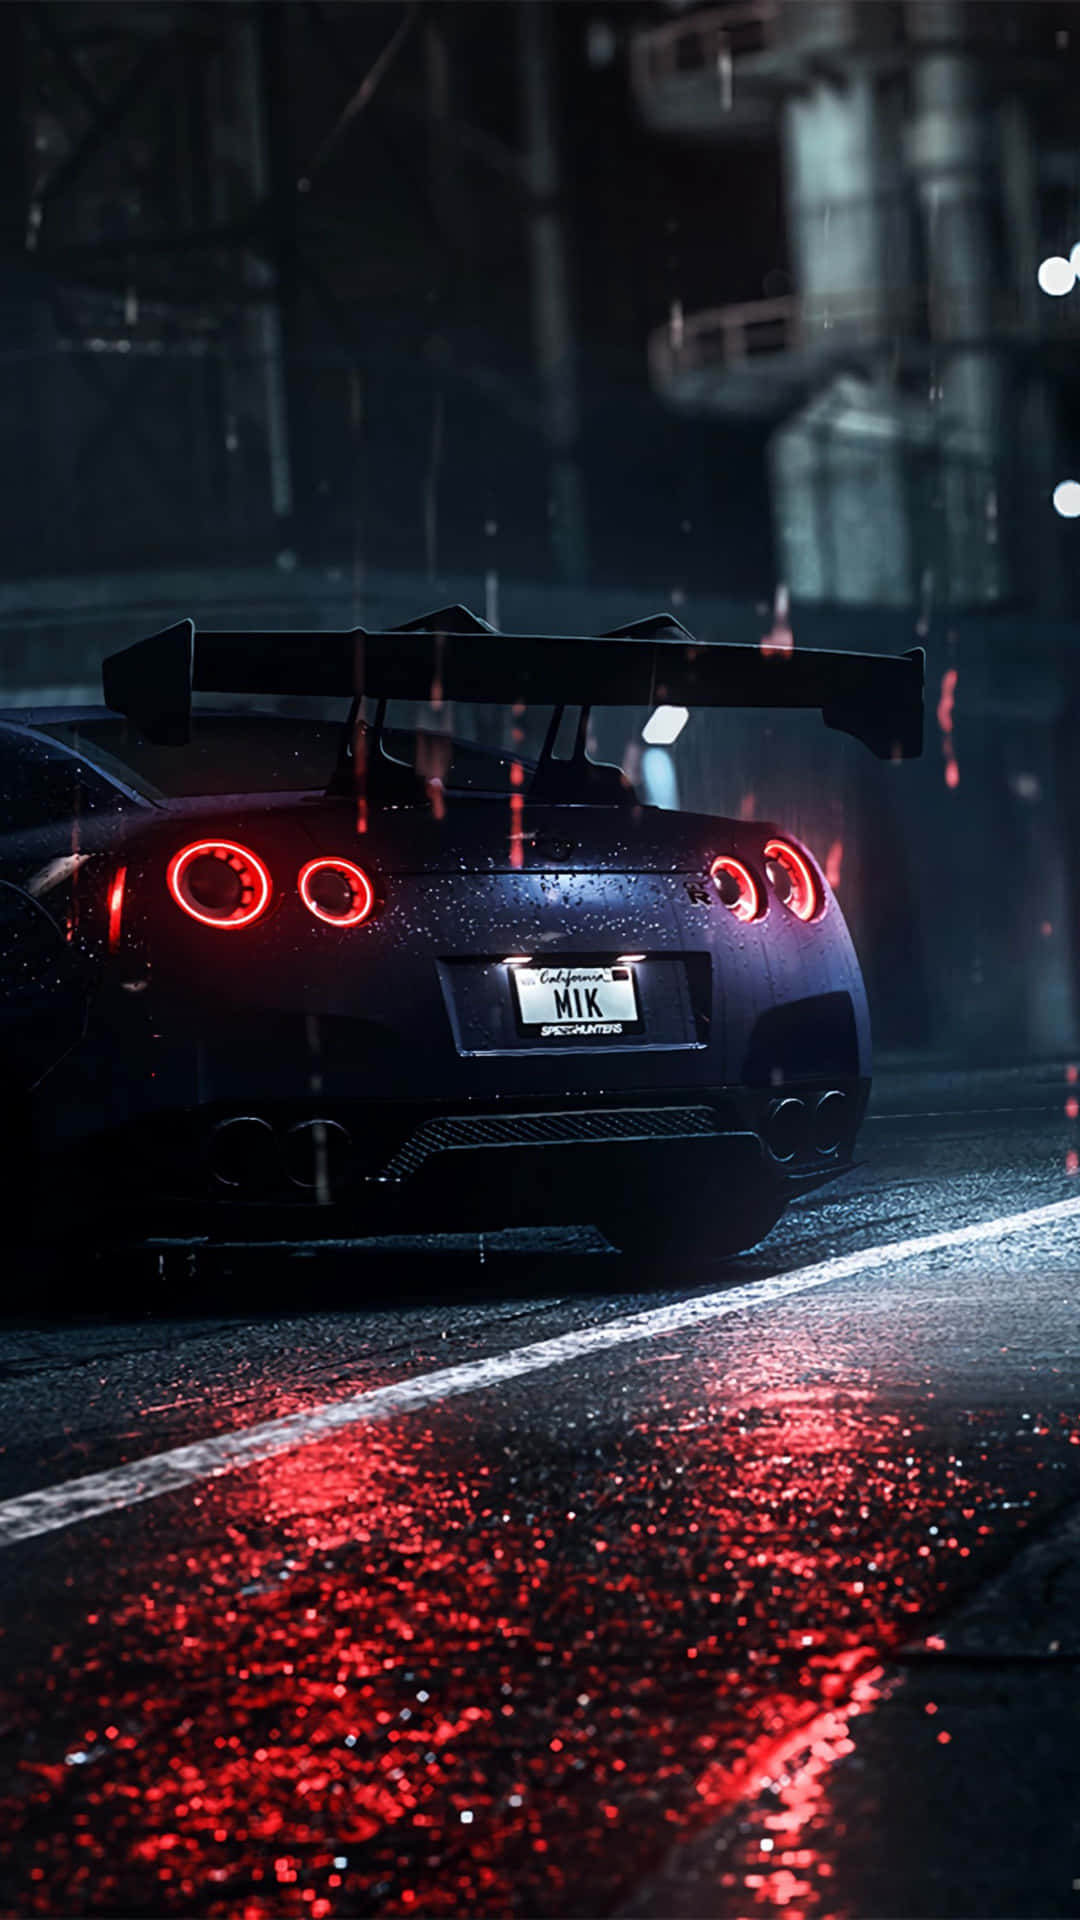 Blending style and speed, the Cool Nissan Skyline is a car you won't soon forget. Wallpaper